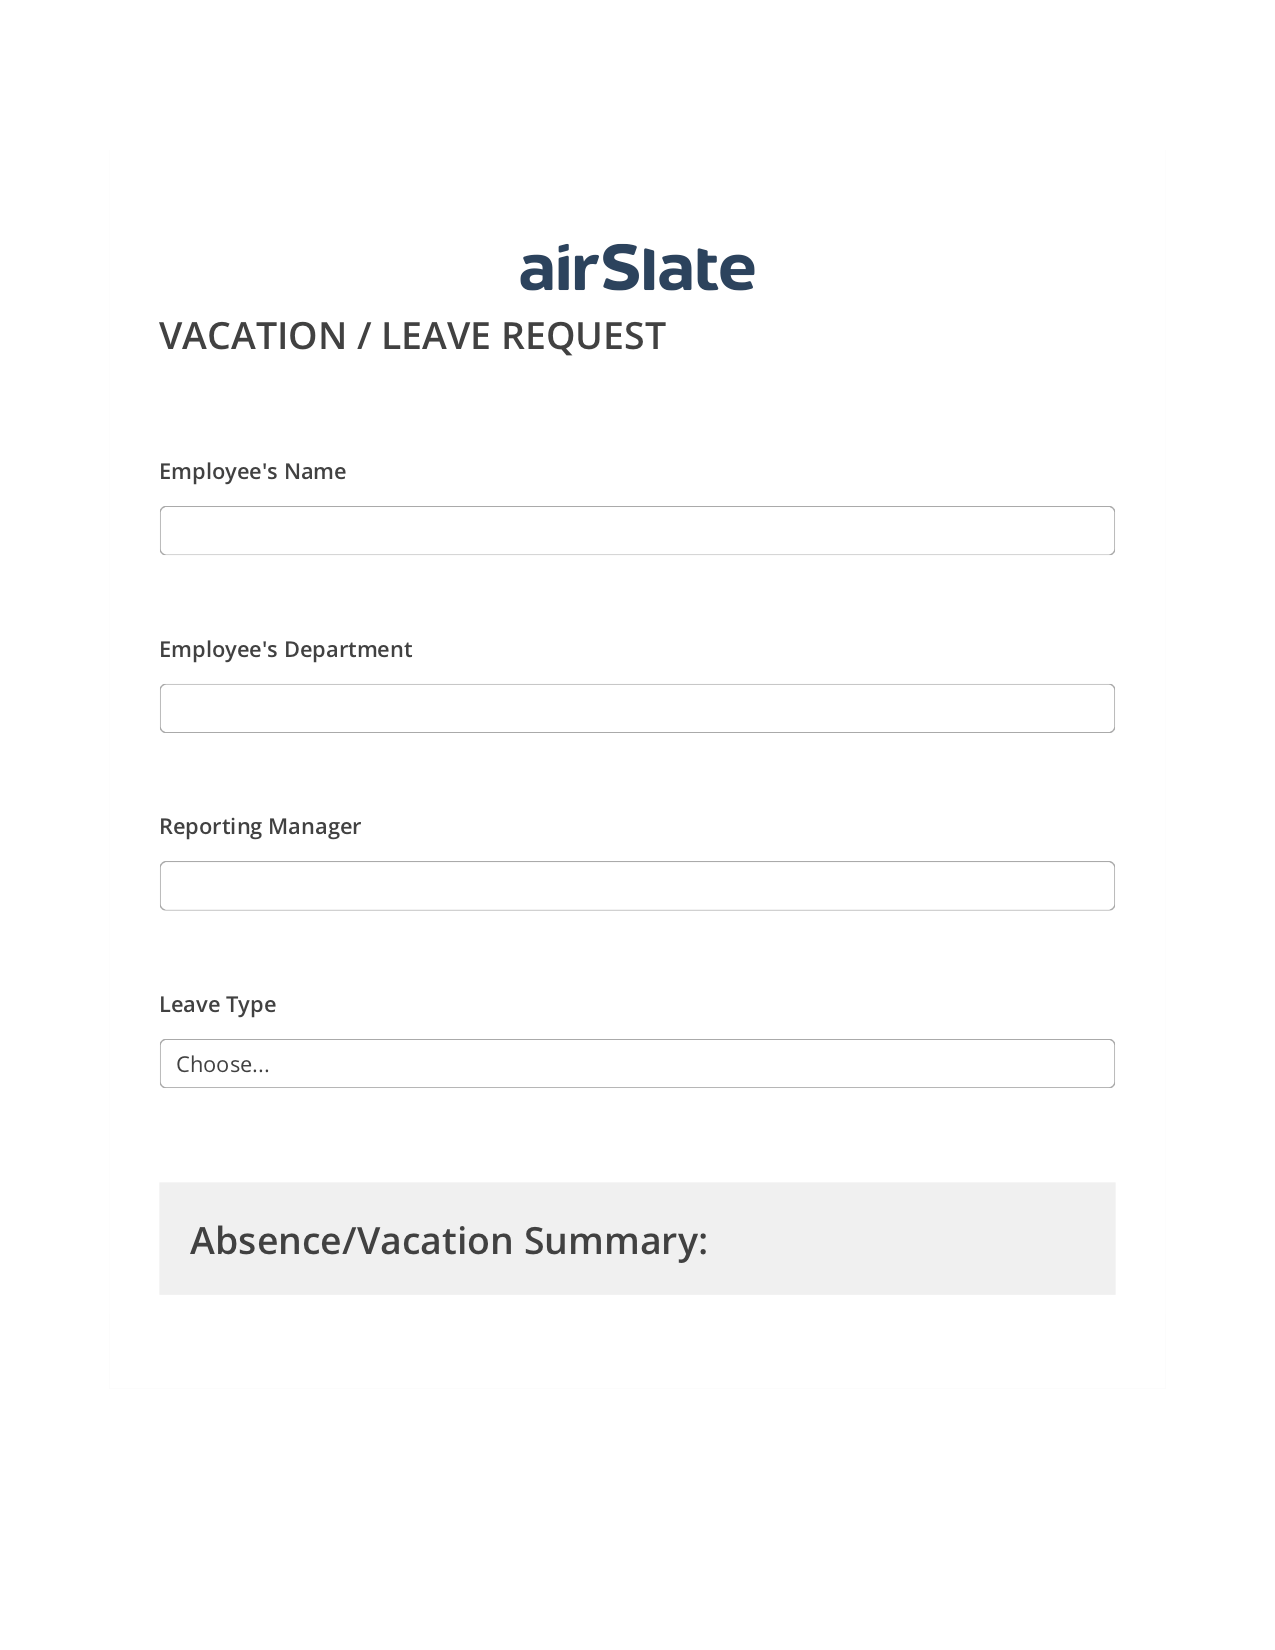 Vacation/Leave Request Workflow Pre-fill Dropdowns from CSV file Bot, Revoke Access Bot, Post-finish Document Bot